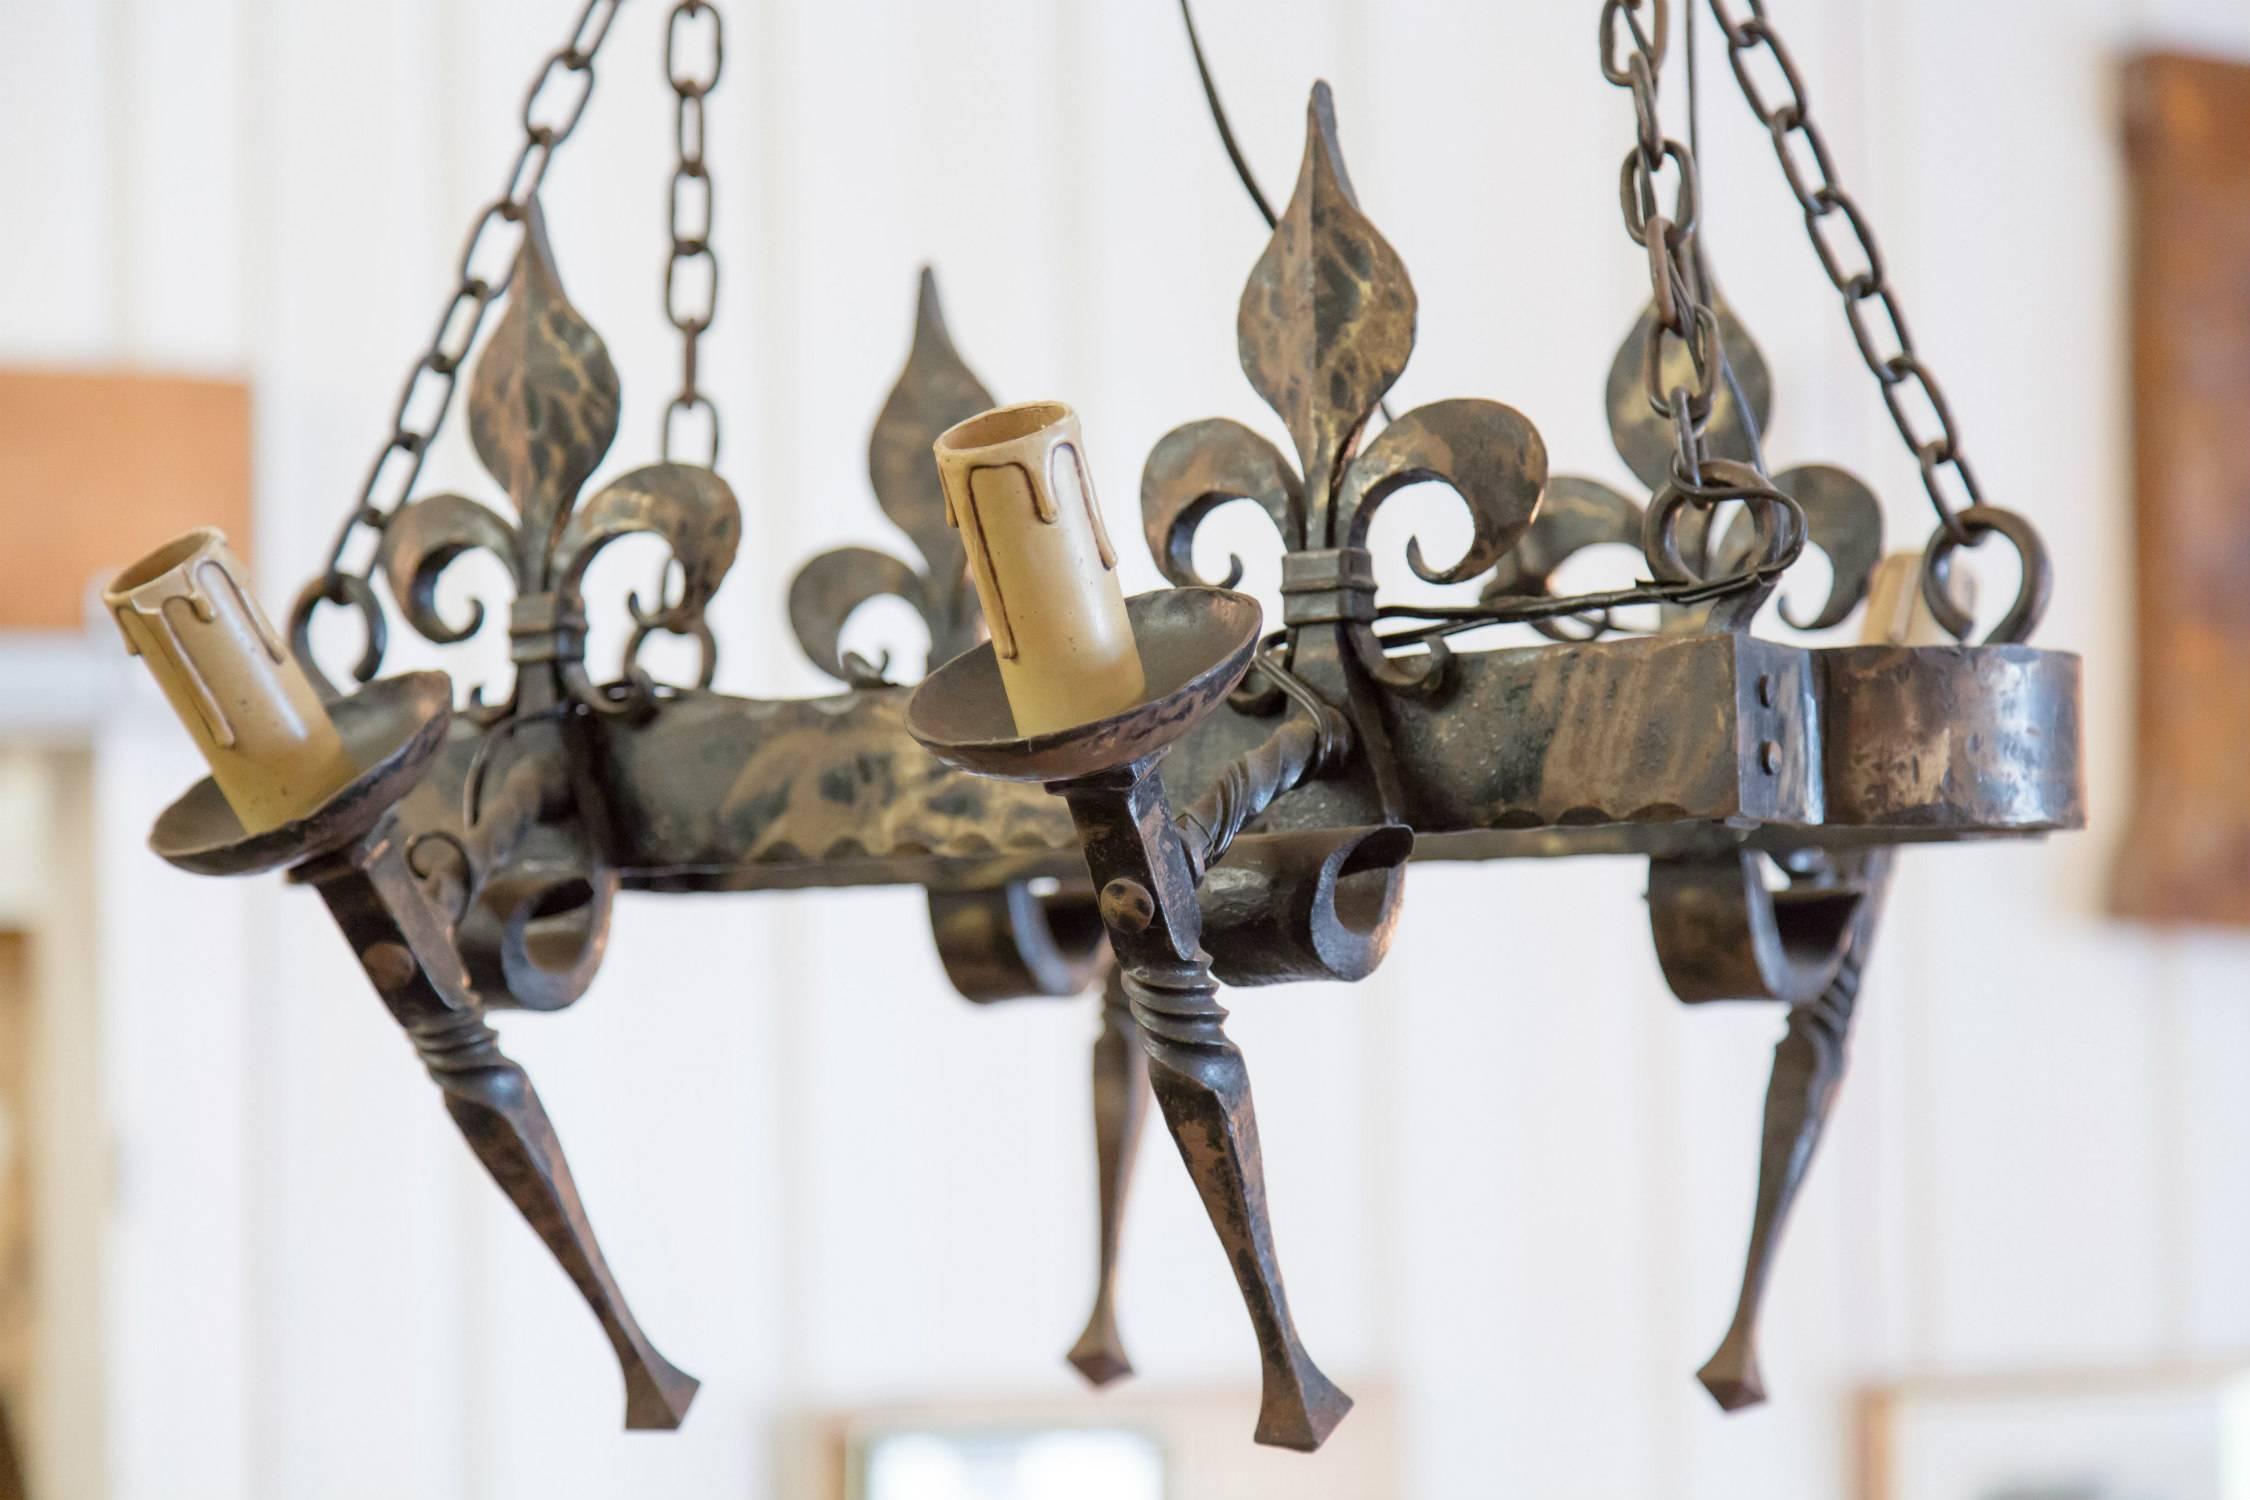 Hand-forged iron four-light Country French chandelier with wonderful patina. This oval chandelier with fleur de lis details and four torchere style mounts holding wax candle sleeves will add rustic charm to any space. The four lights are joined in